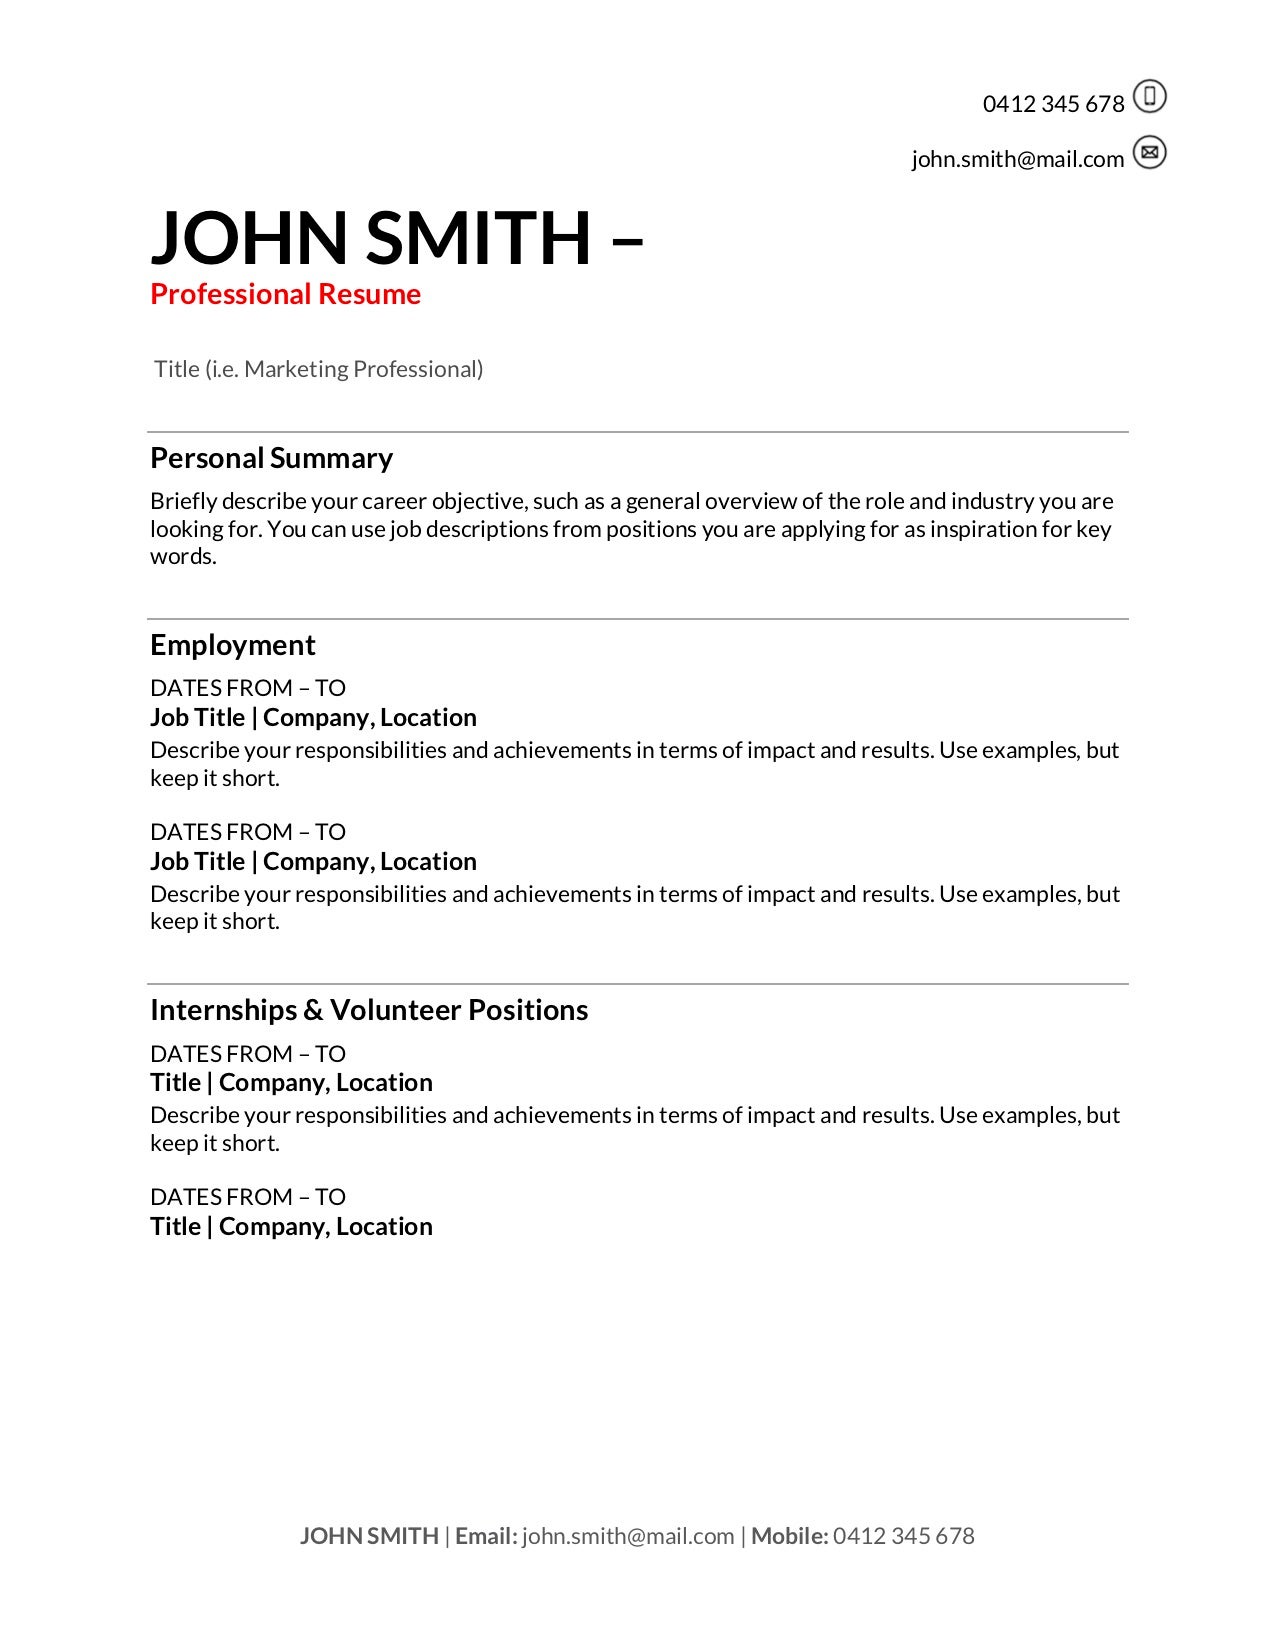 free downloadable resume templates 2017